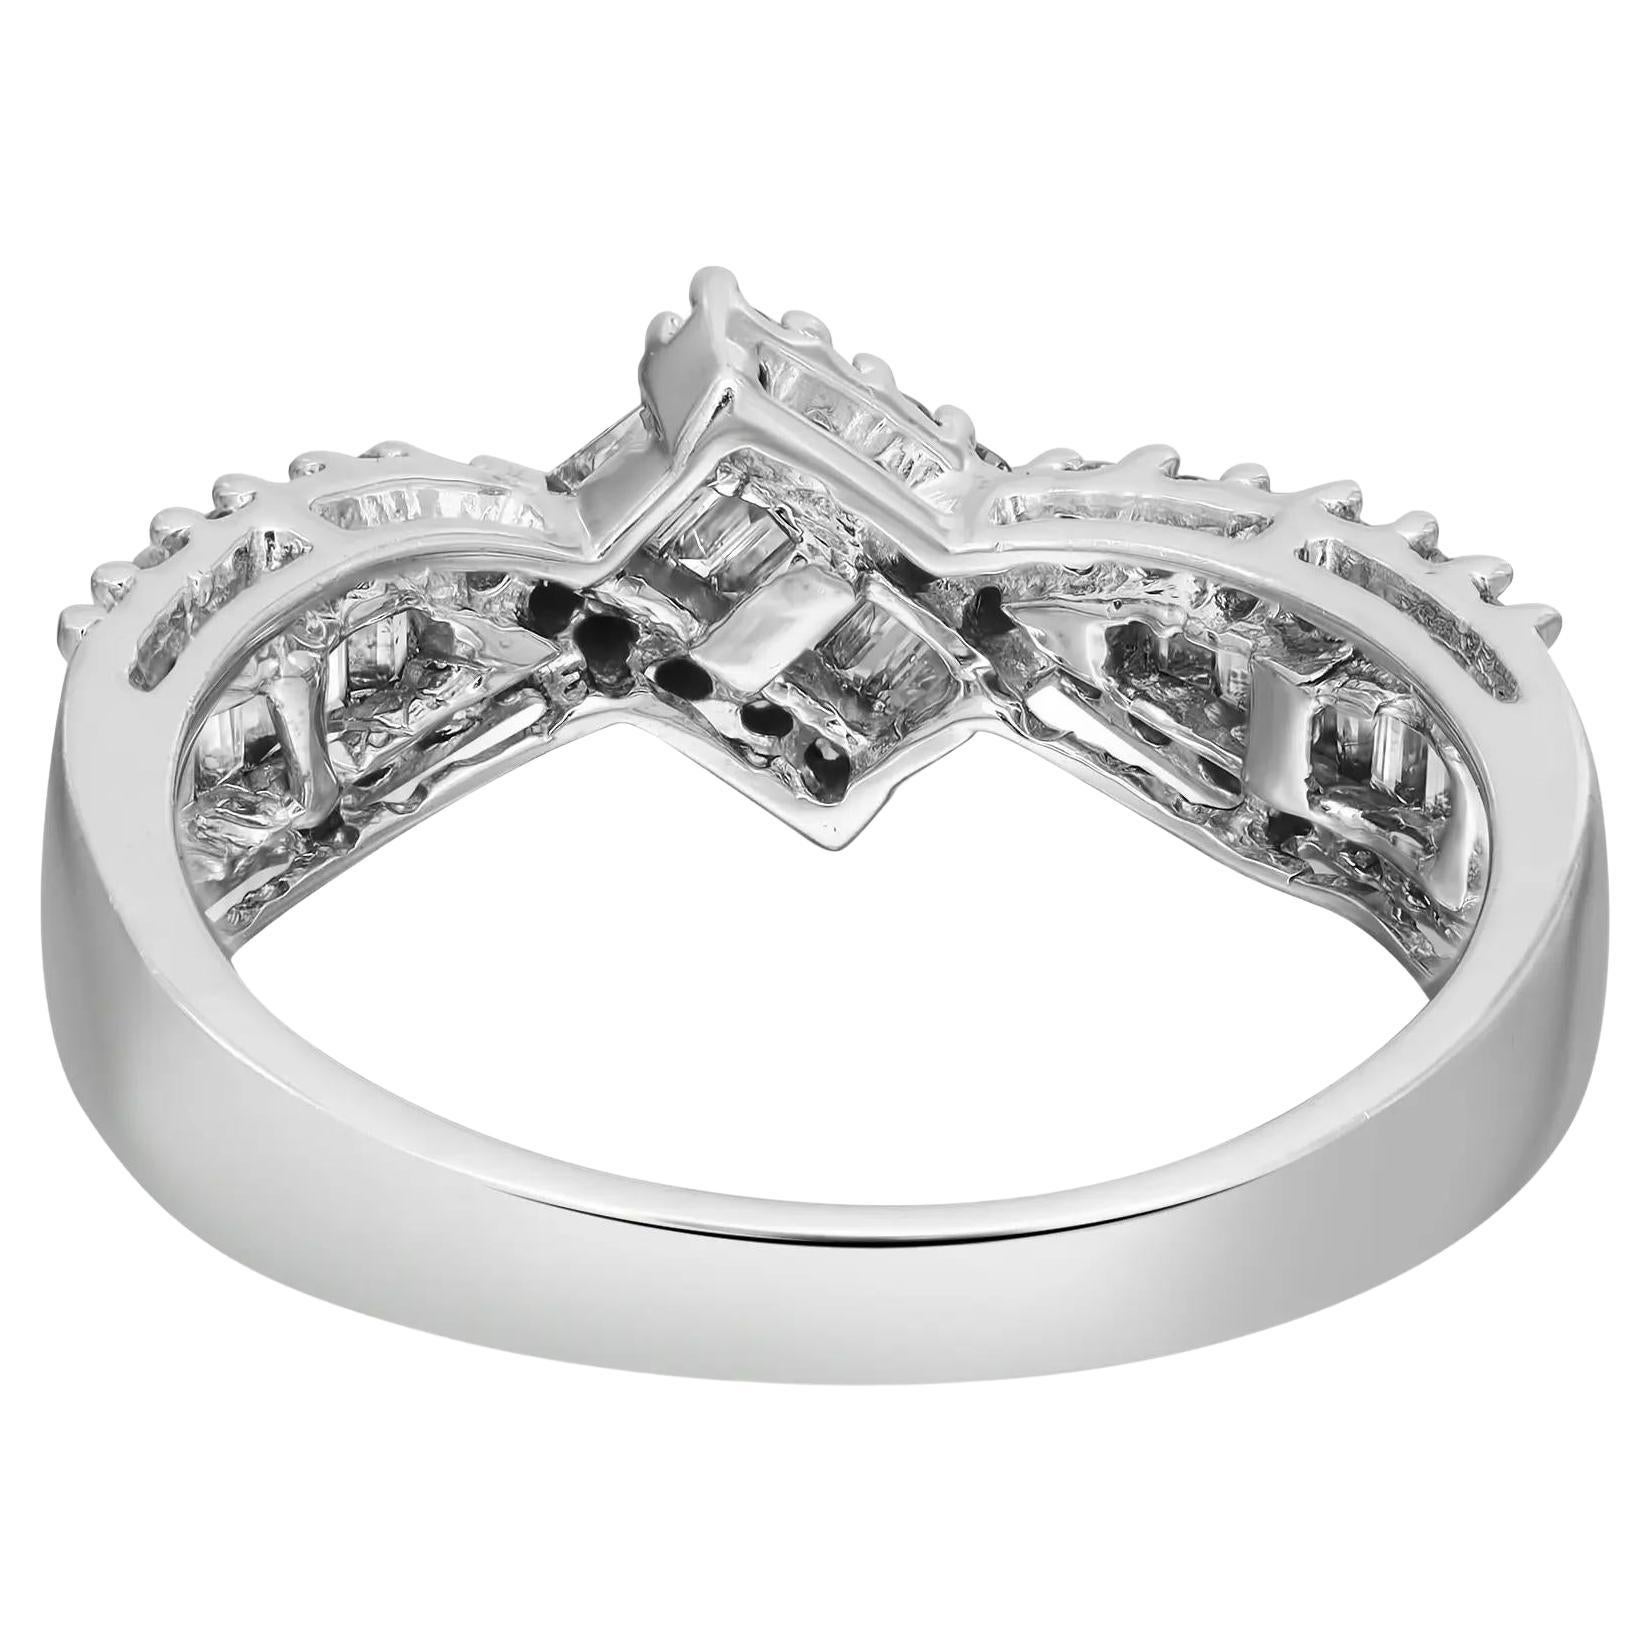 Beautiful and chic, natural diamond ladies cocktail ring crafted in 14k white gold. This fancy ring is highlighted with 0.30 carat of channel set baguette cut and 0.35 carat of prong set round cut dazzling diamonds with I color and SI1 clarity.